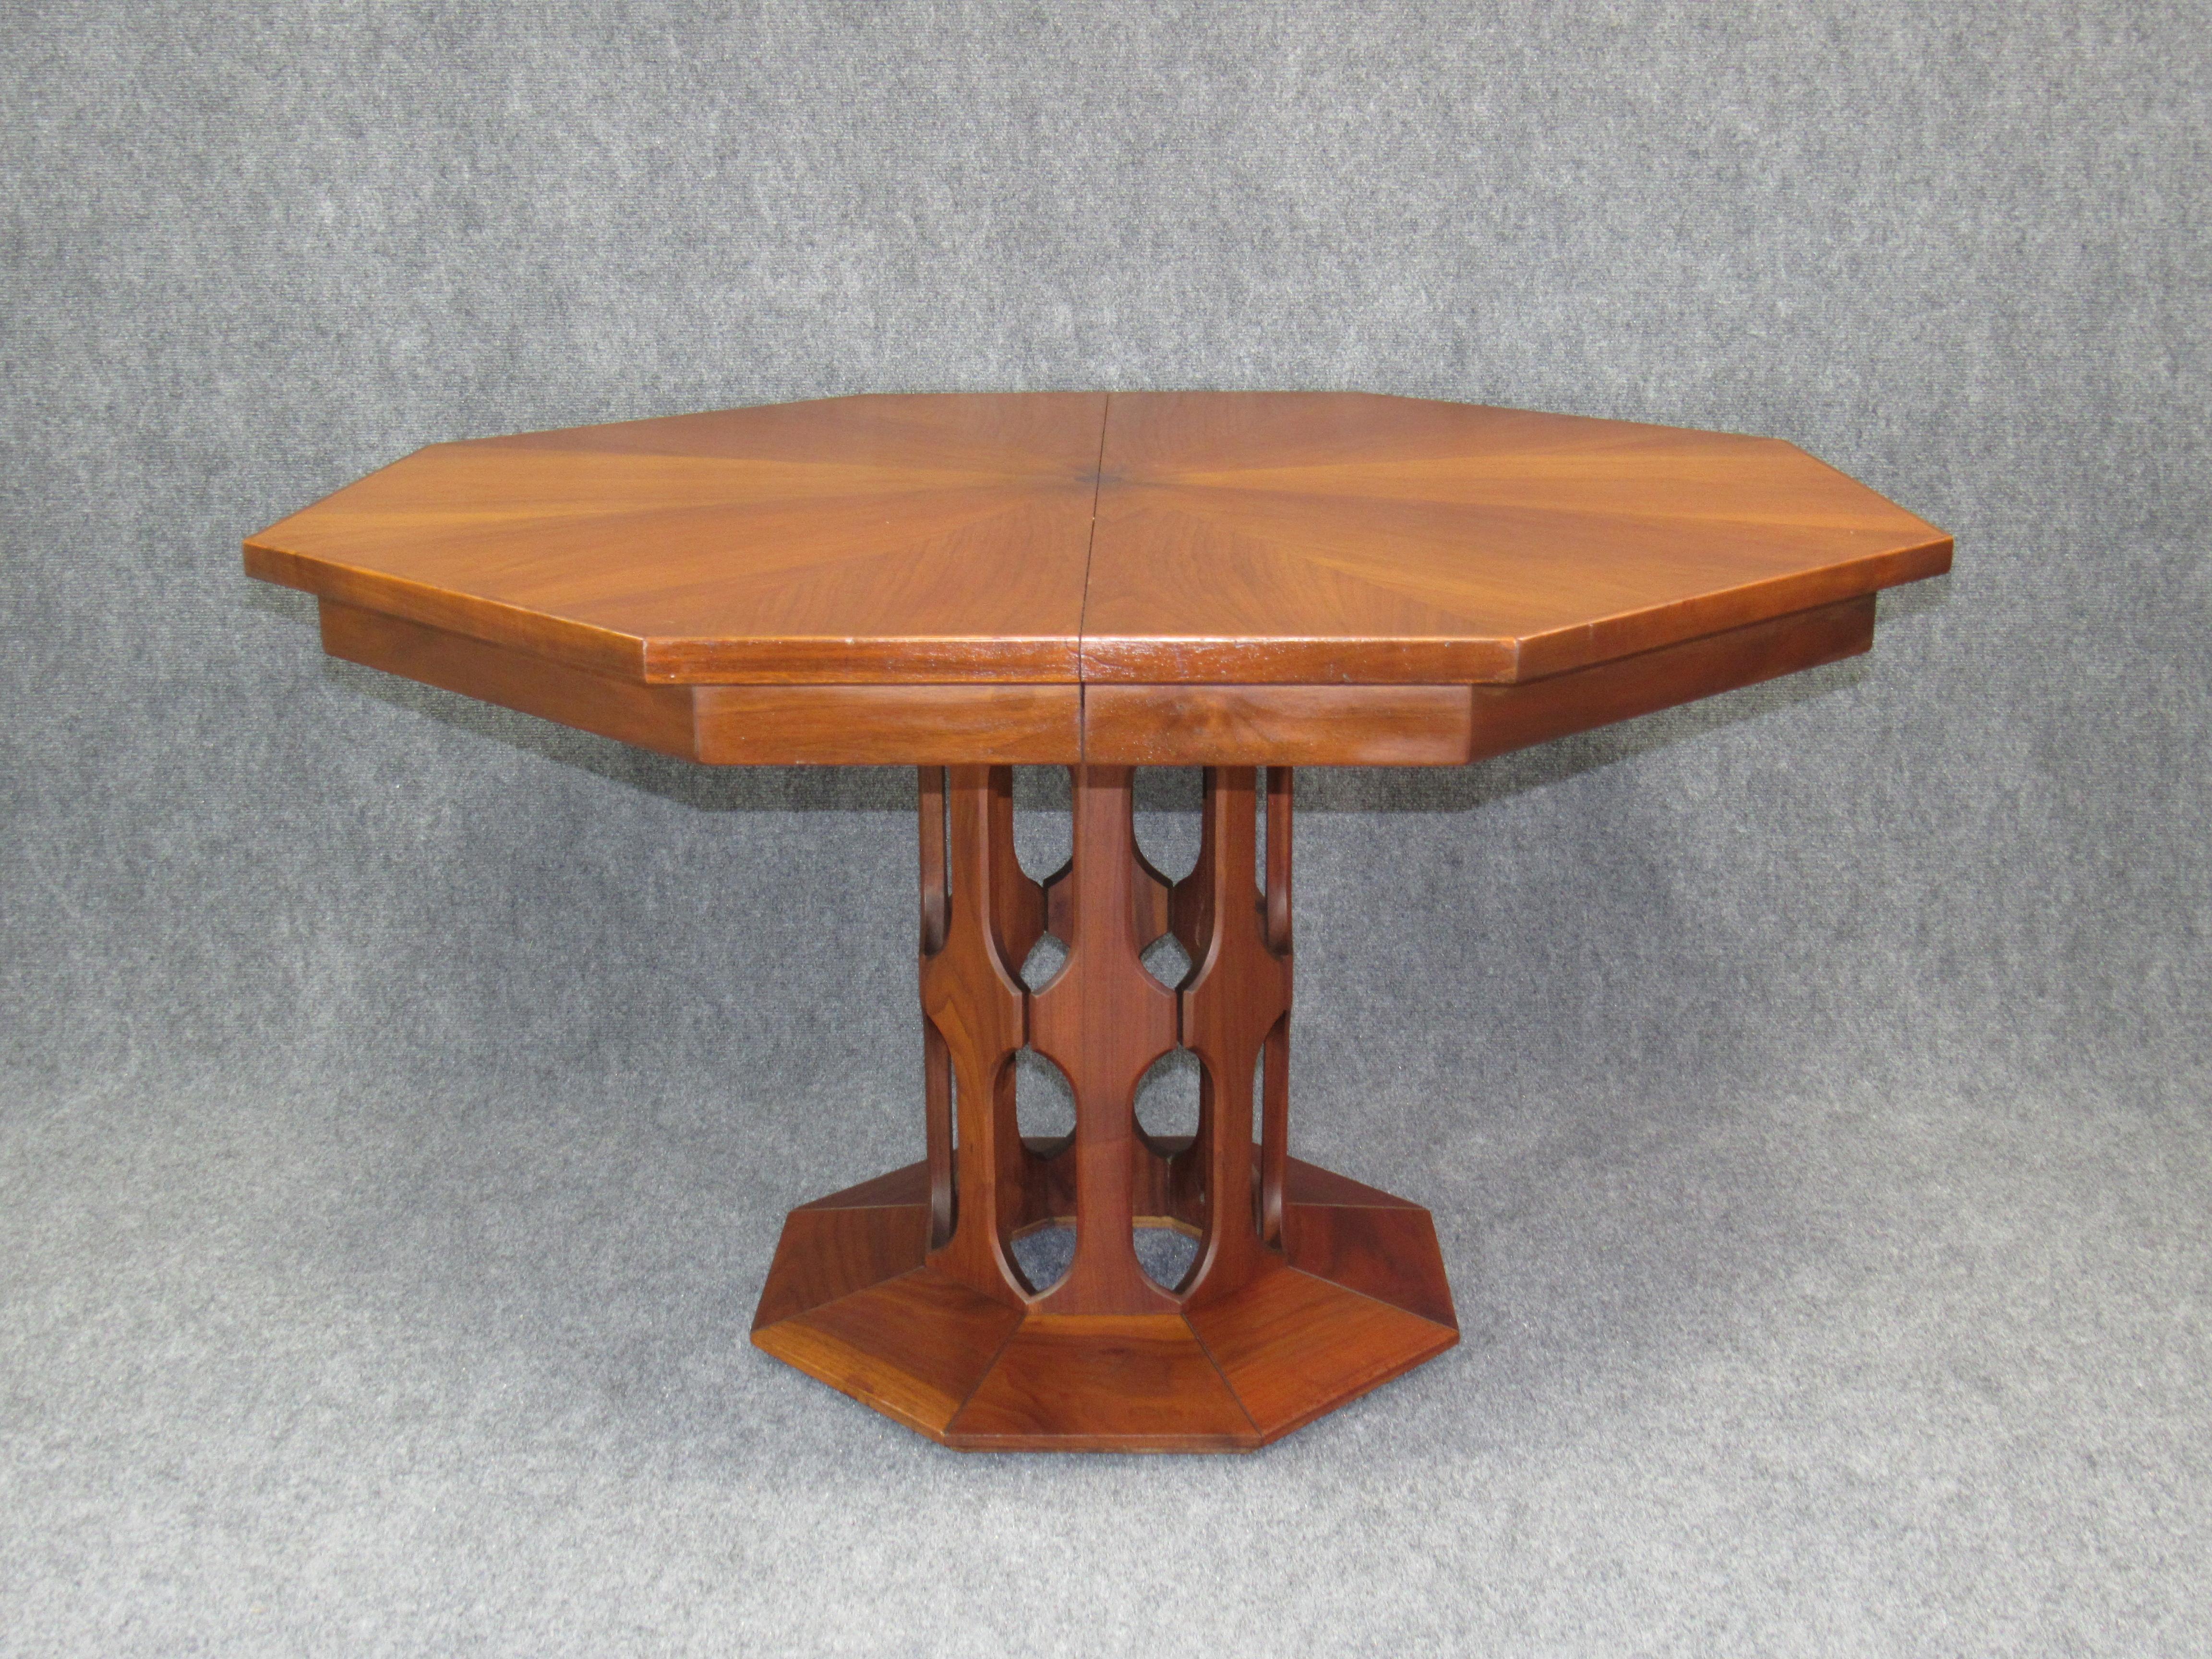 This Mid-Century Modern Harvey Probber octagonal dining extension table in walnut will be the centerpiece of any dining room or eating area. Exquisitely made and engineered by Harvey Probber with extraordinary level of detail. Fold-down solid walnut